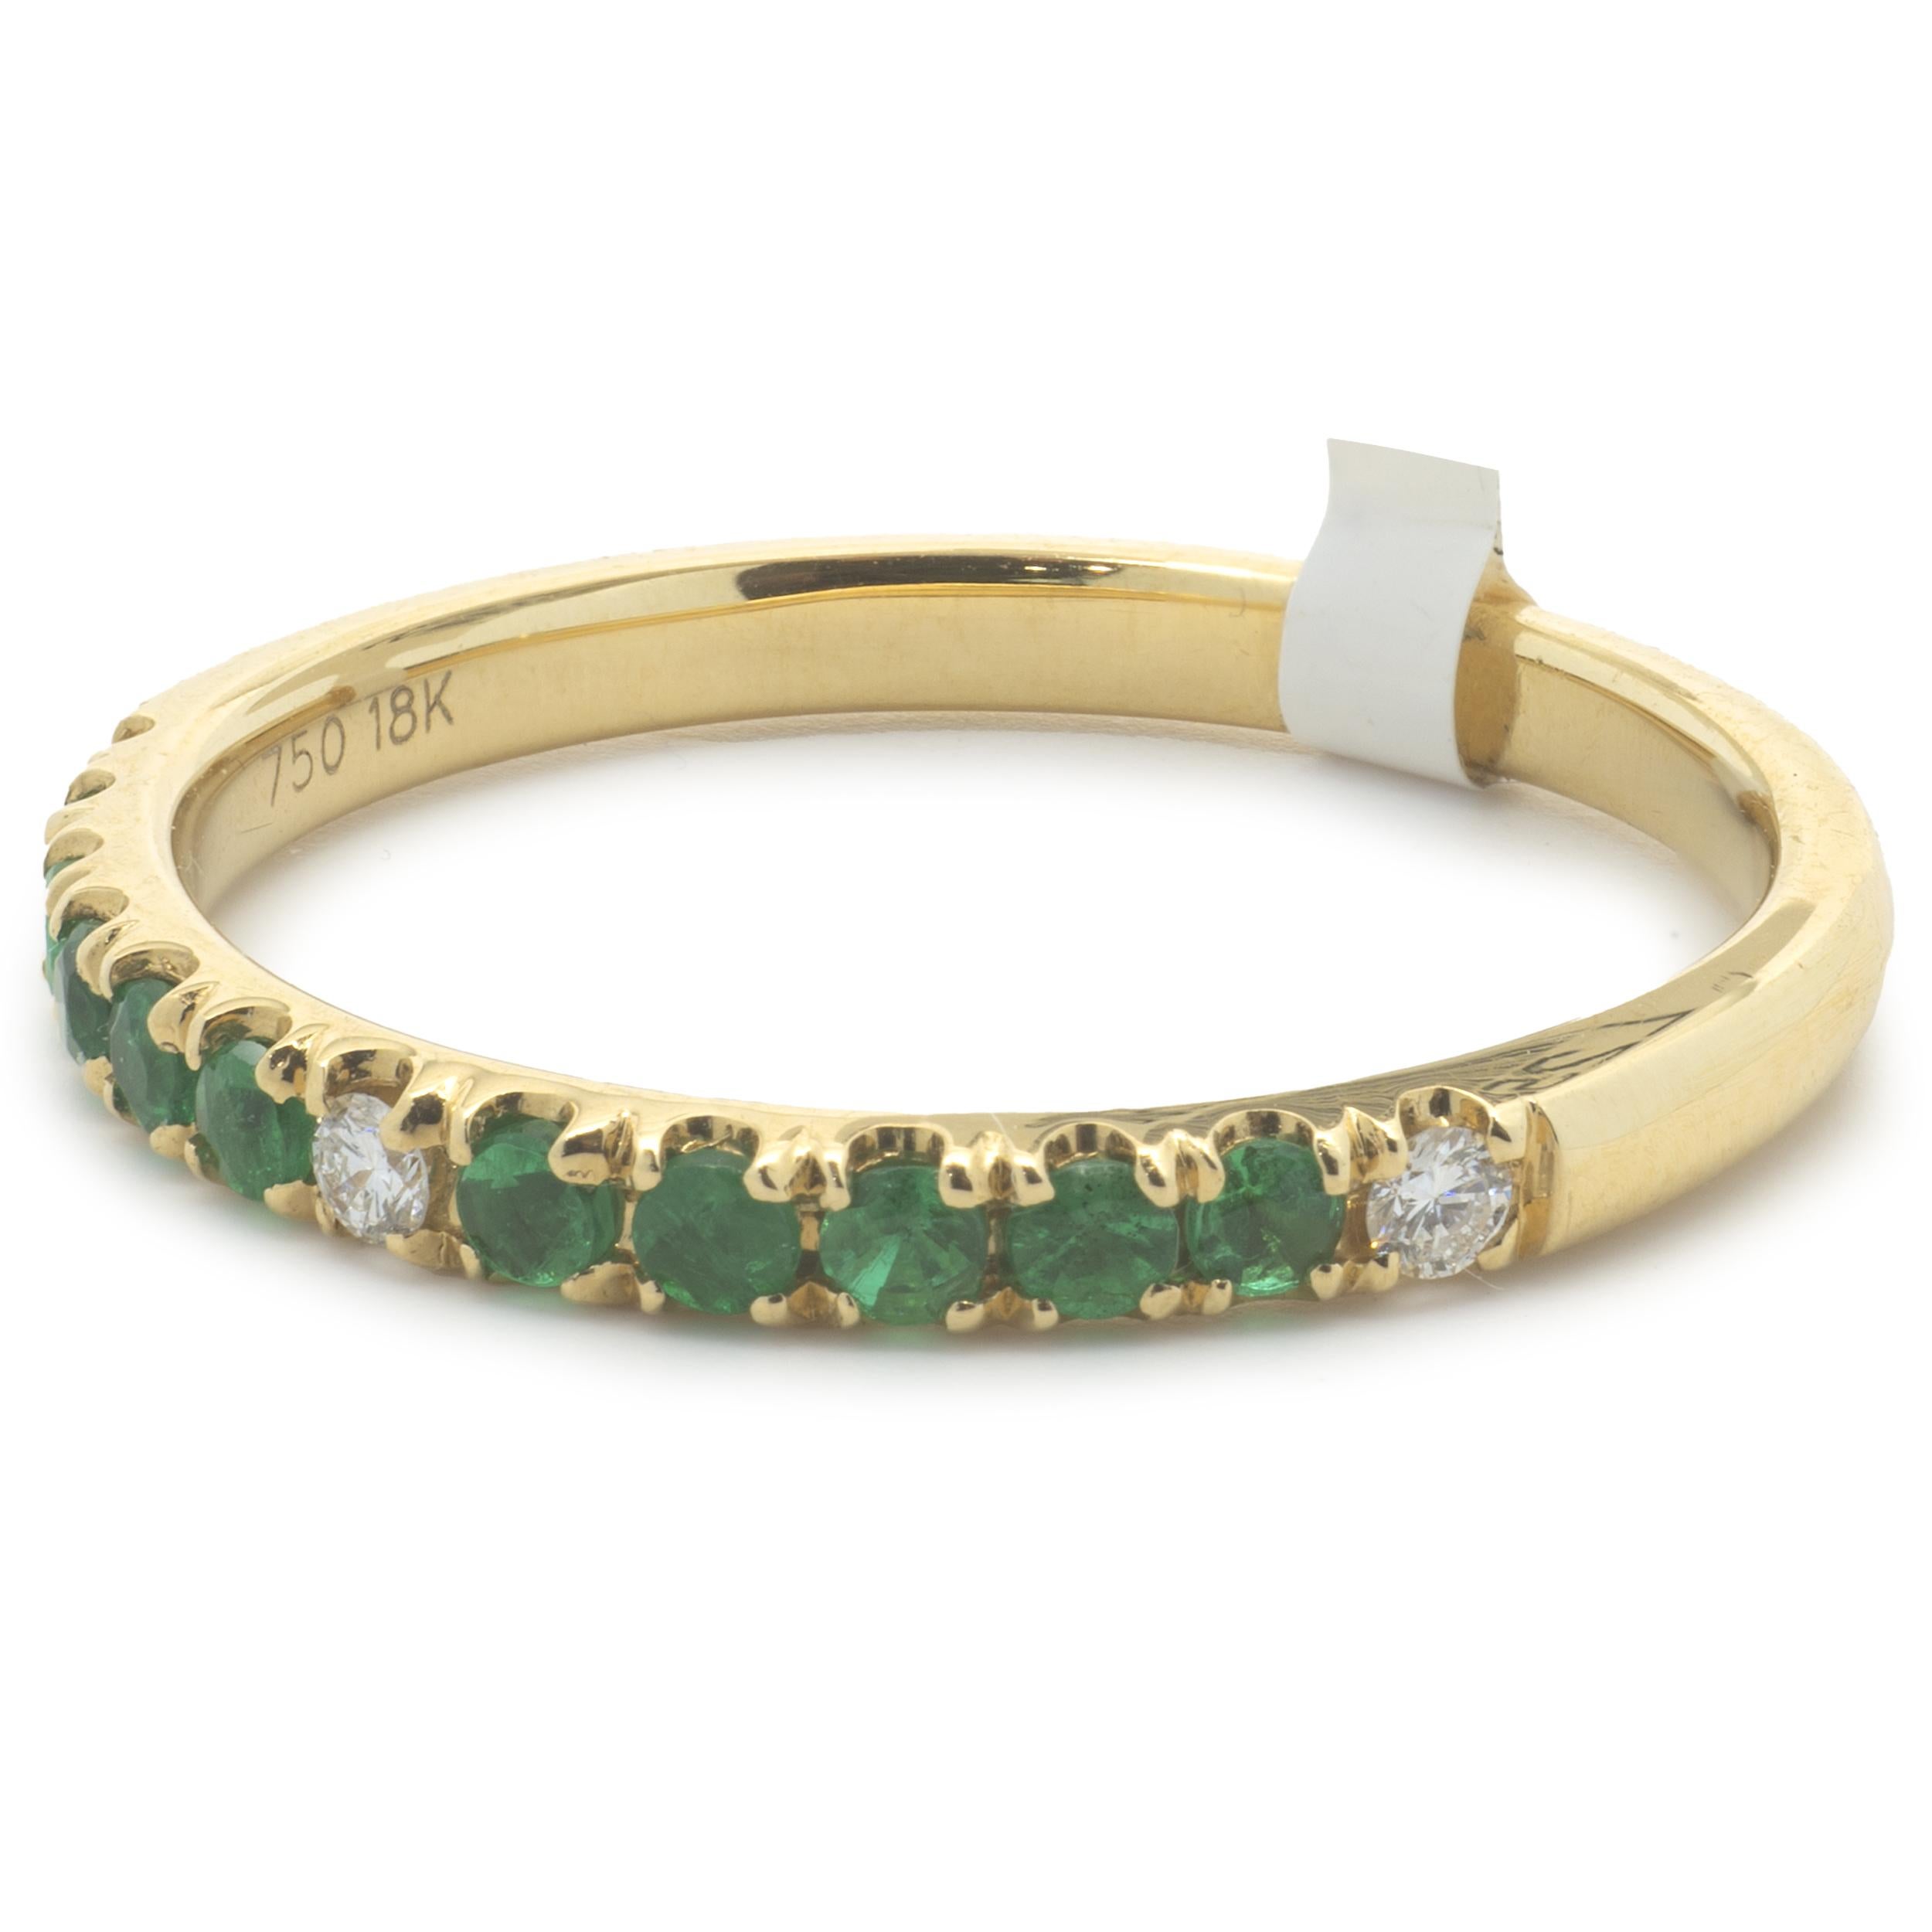 Material: 18K yellow gold
Diamond: 3 round brilliant cut = .06cttw
Color: G
Clarity: VS2
Emerald: 10 round cut = .24cttw
Ring Size: 7 (please allow up to 2 additional business days for sizing requests)
Dimensions: ring top measures 2.30mm
Weight: